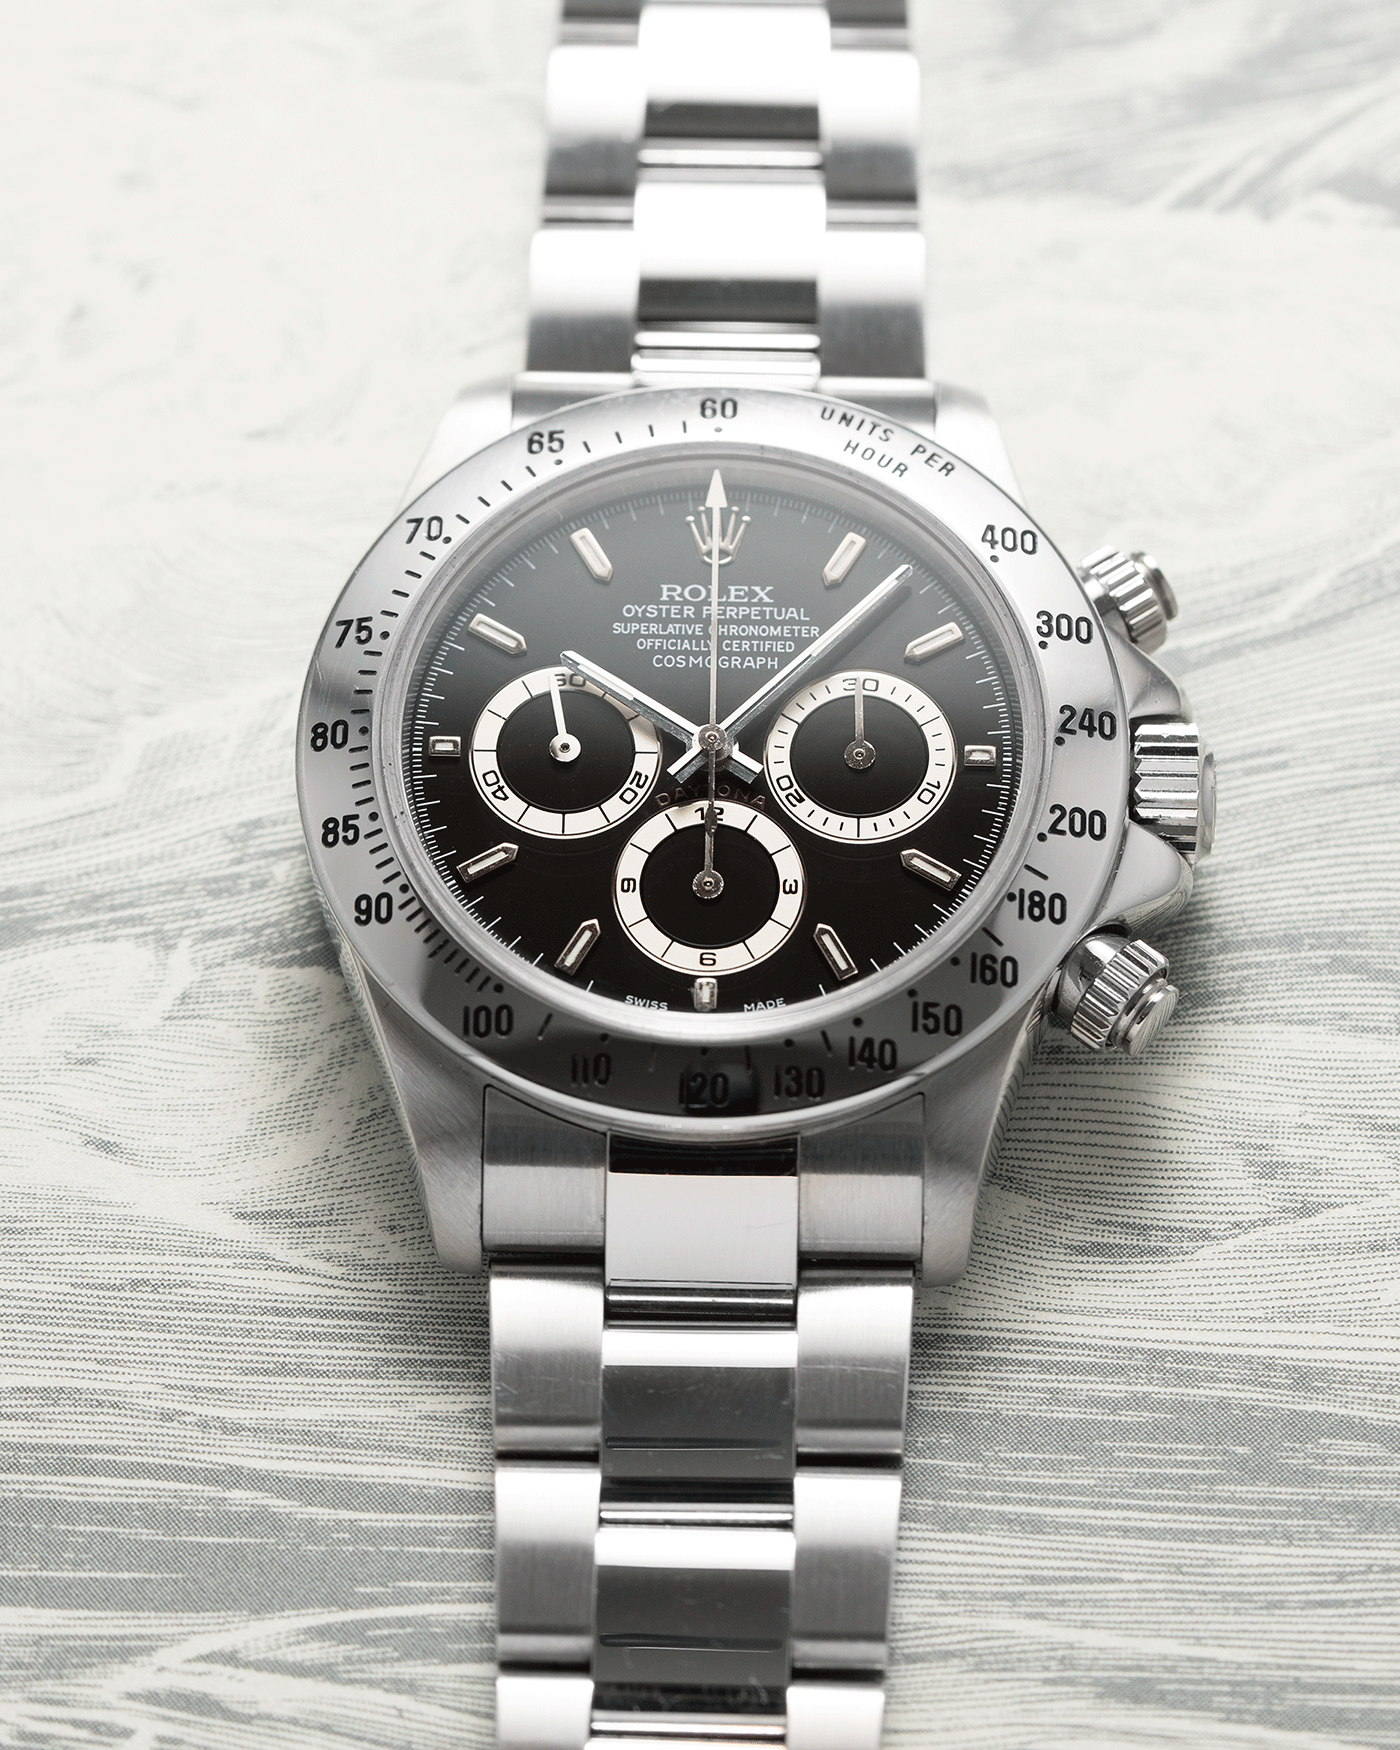 Brand: Rolex Year: 2000 Model: Cosmograph Daytona Reference Number: 16520 Material: Stainless Steel Movement: Rolex Zenith El Primero Caliber 4030  Case Diameter: 40mm Bracelet: Stainless Steel Rolex Oyster Bracelet